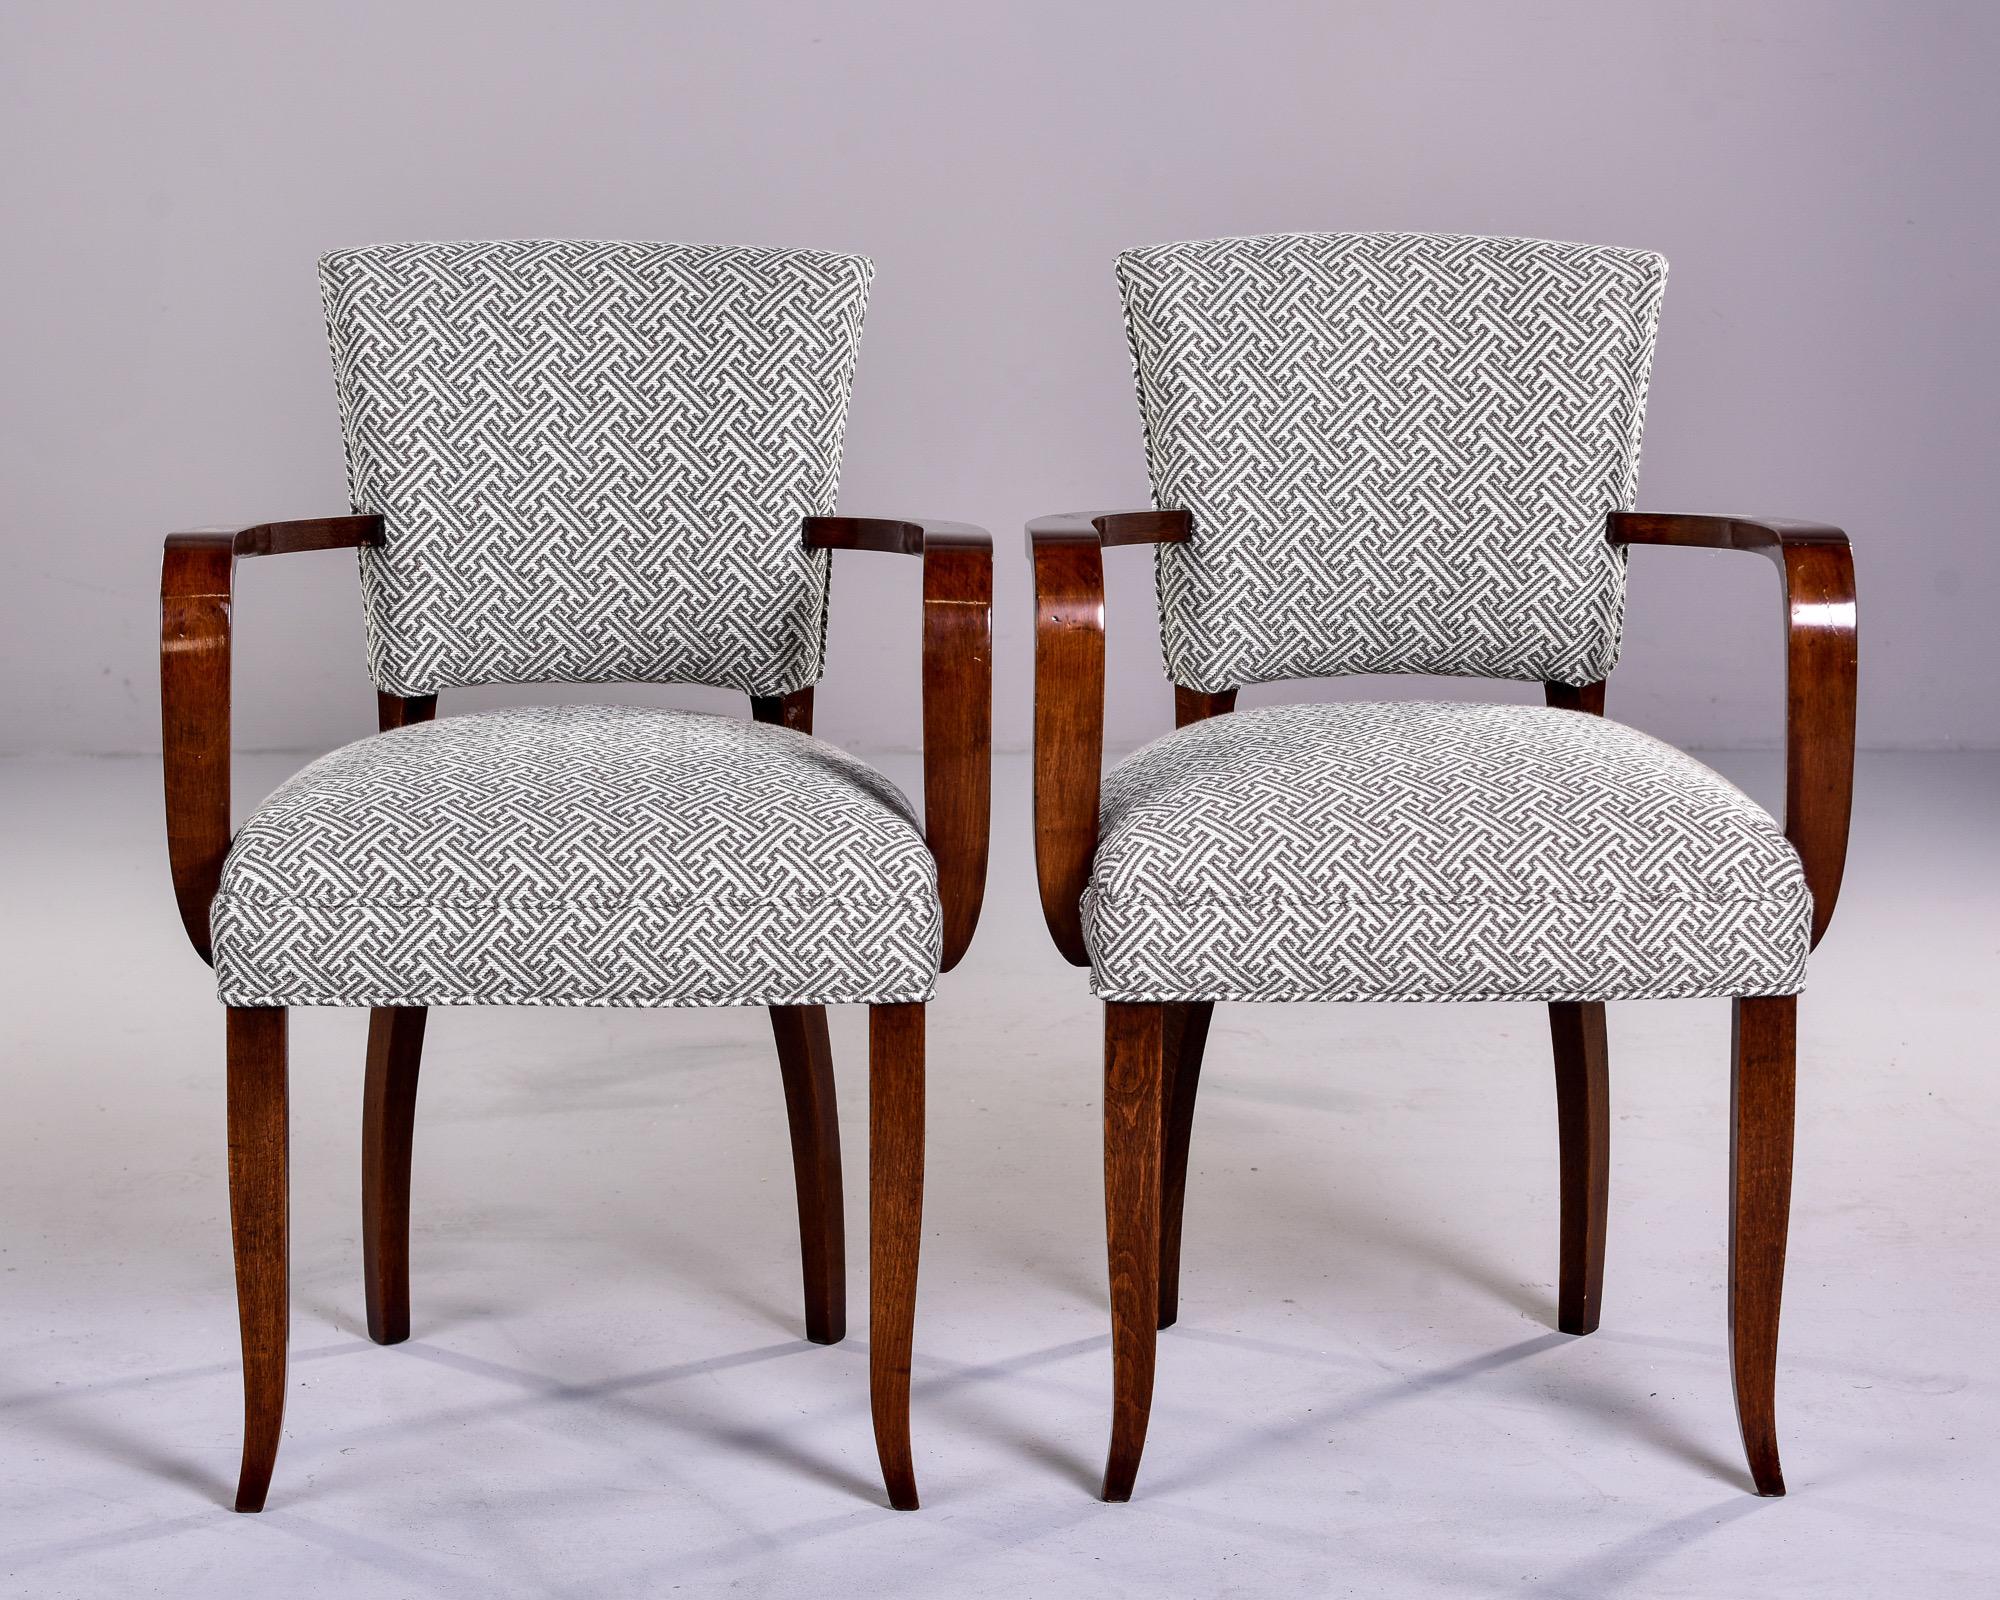 20th Century Set Four Mahogany Bridge Chairs with New Upholstery